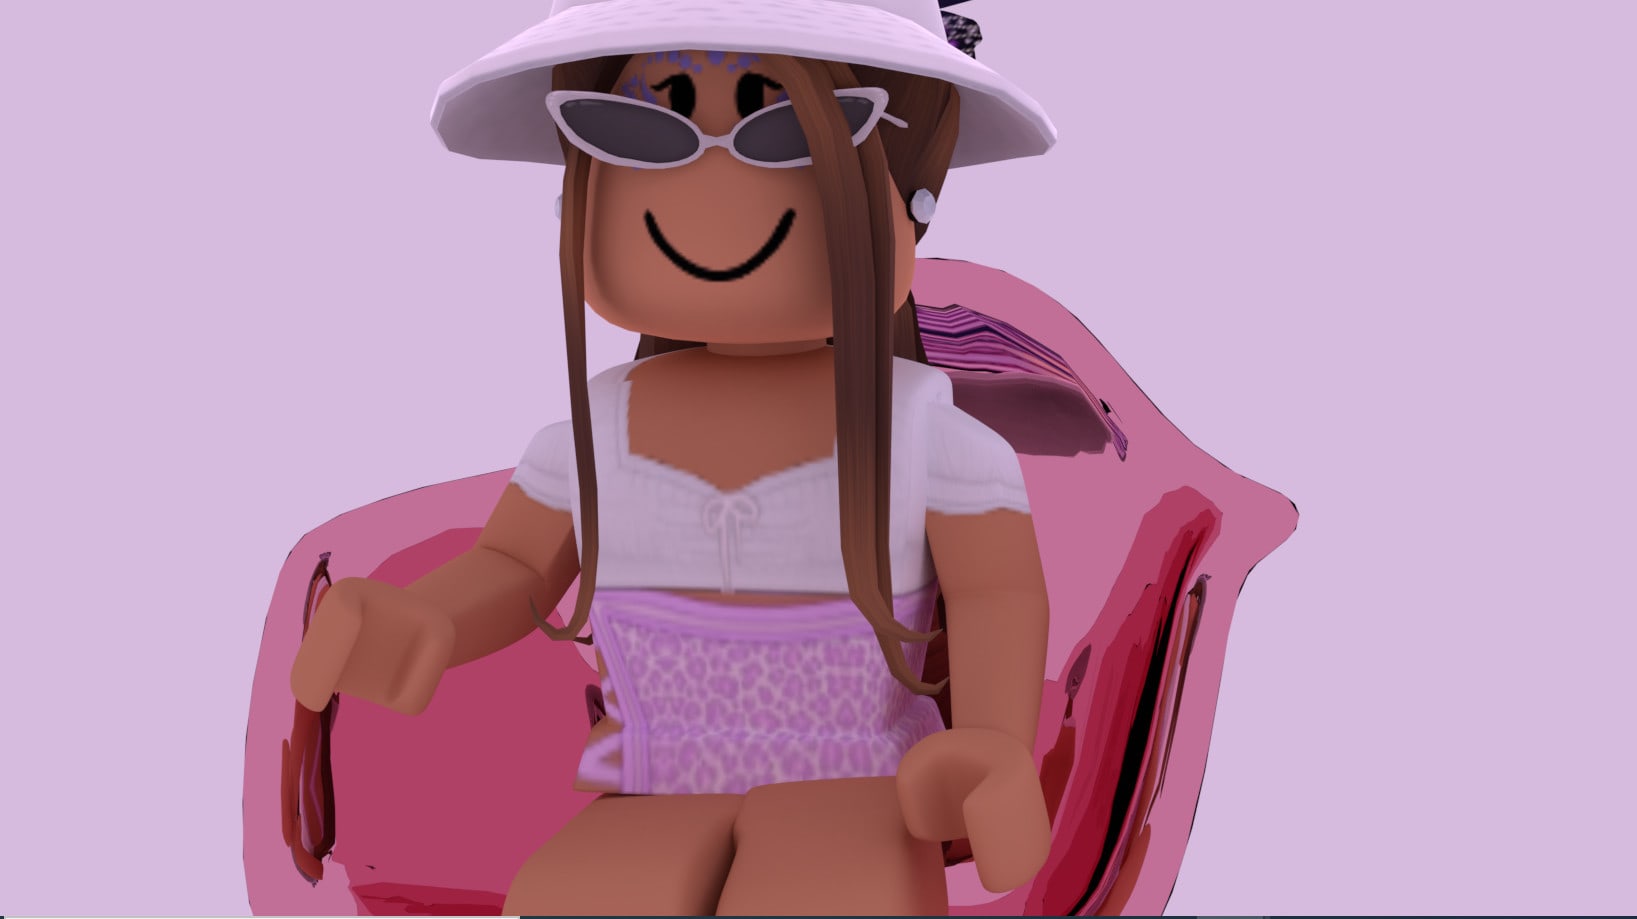 Make An Aesthetic Roblox Gfx By Mxylea - roblox character gfx aesthetic